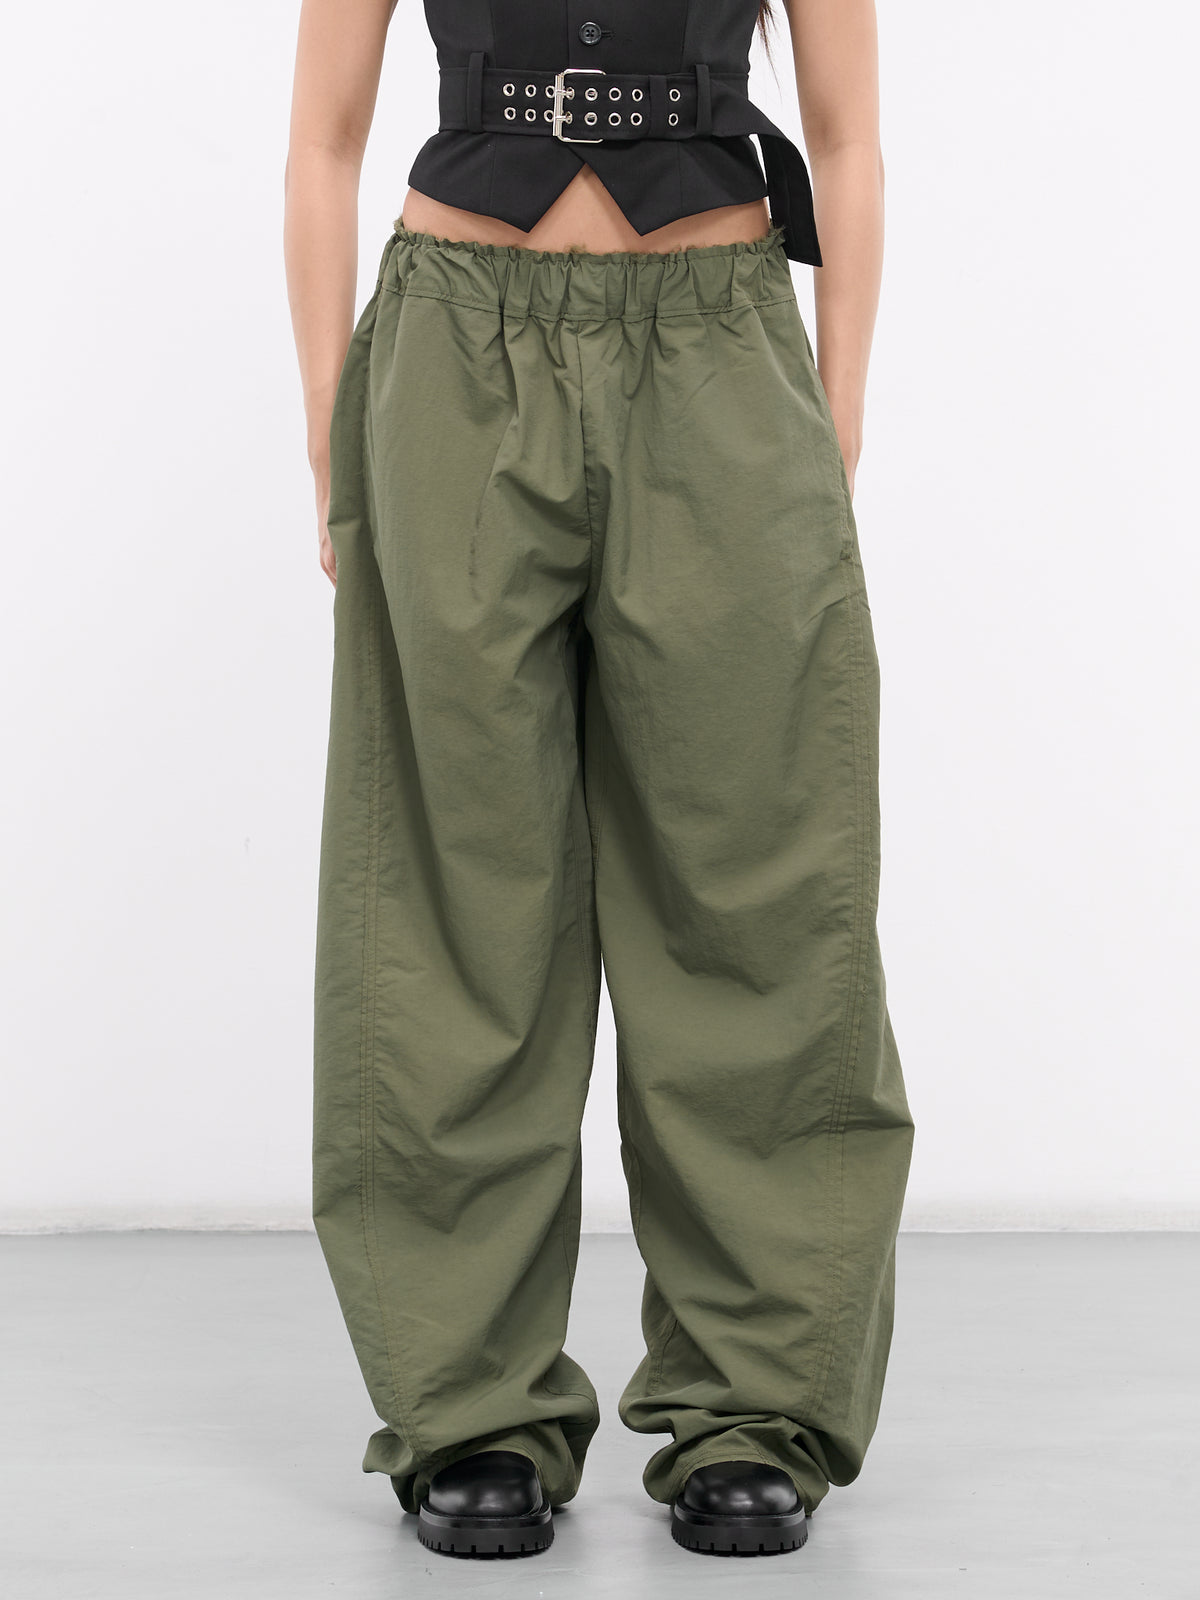 Warm Up Trousers (WARM-UP-TROUSERS-KHAKI)